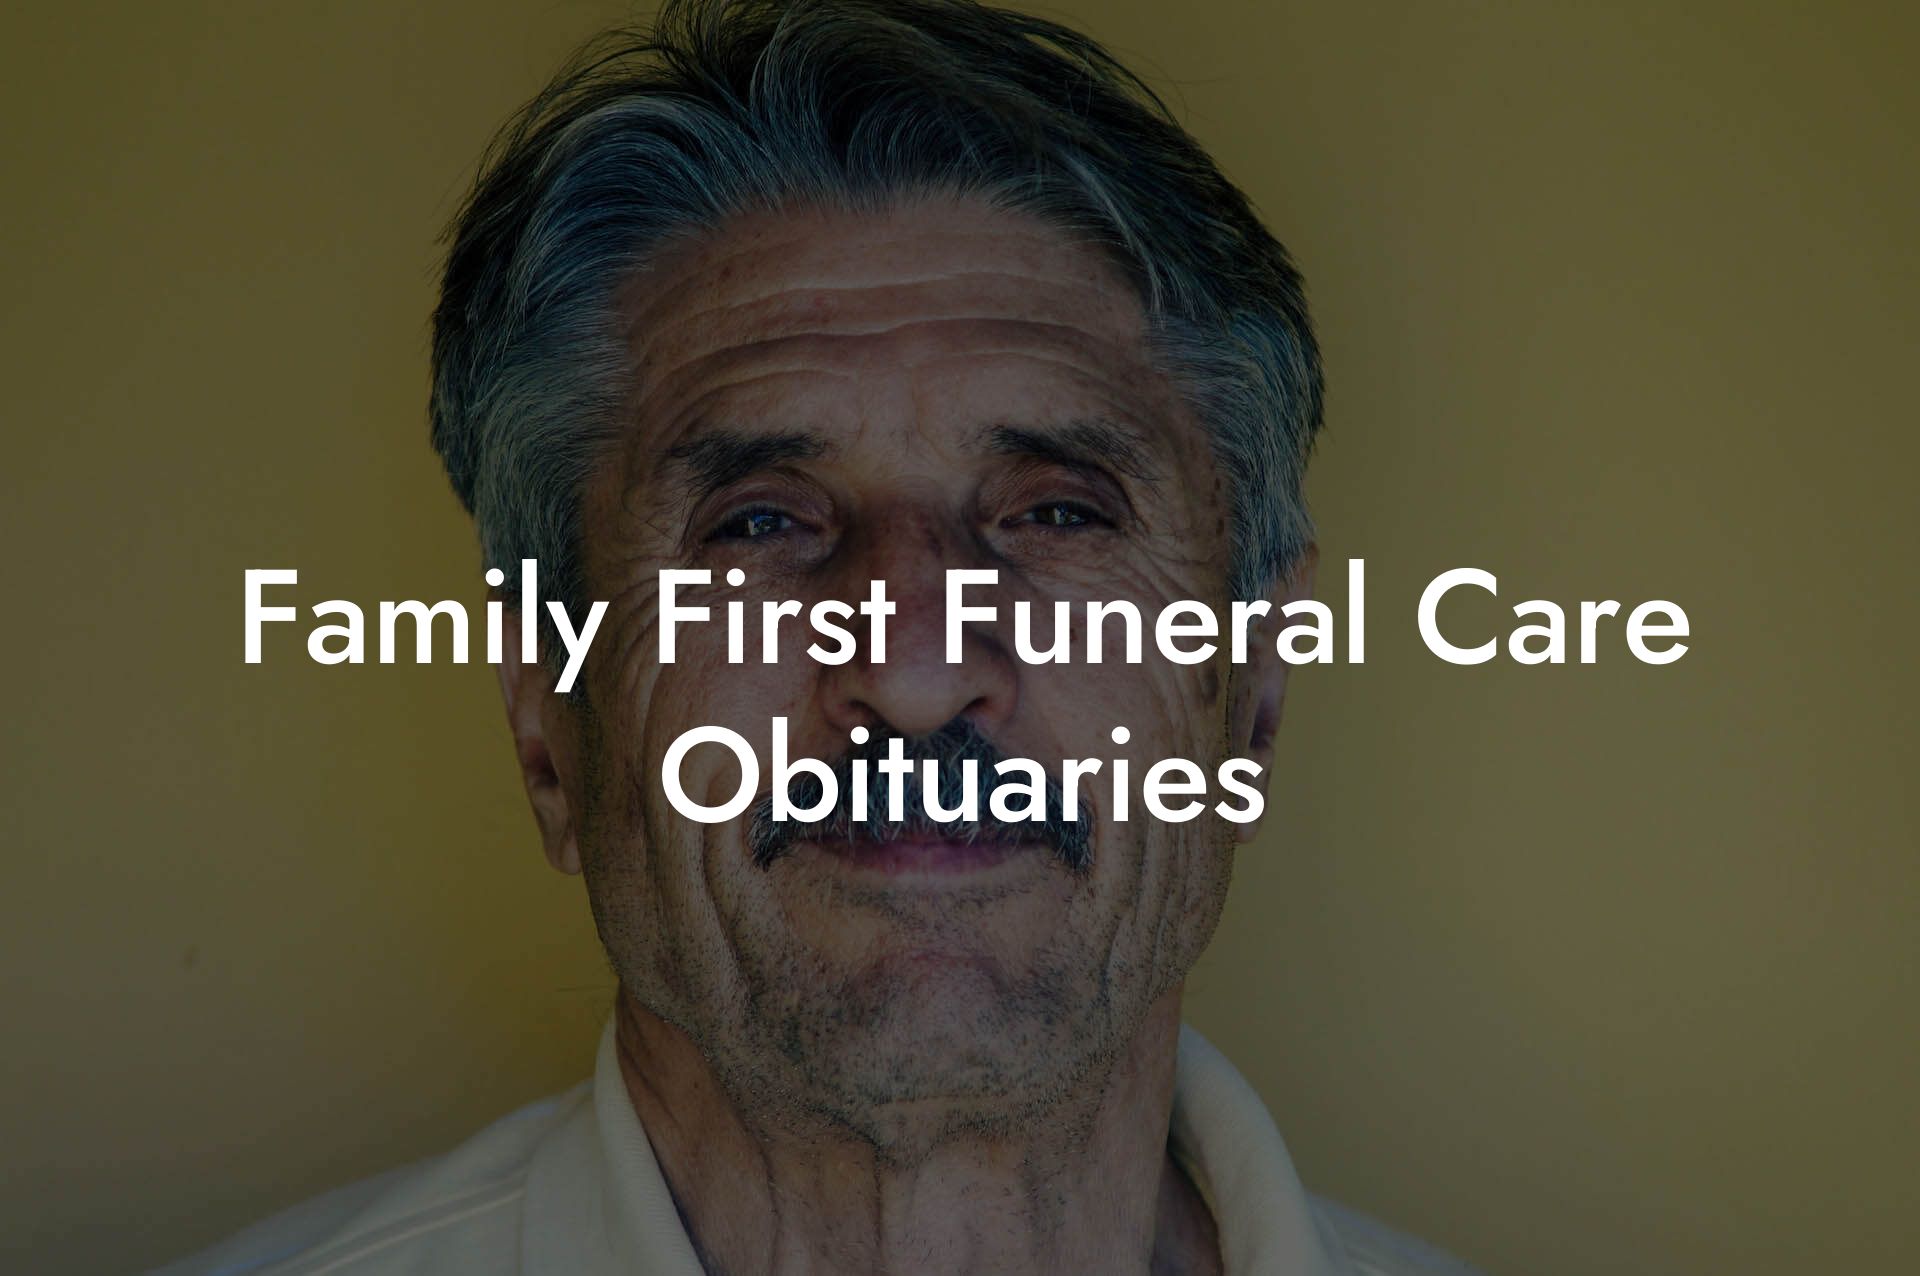 Family First Funeral Care Obituaries